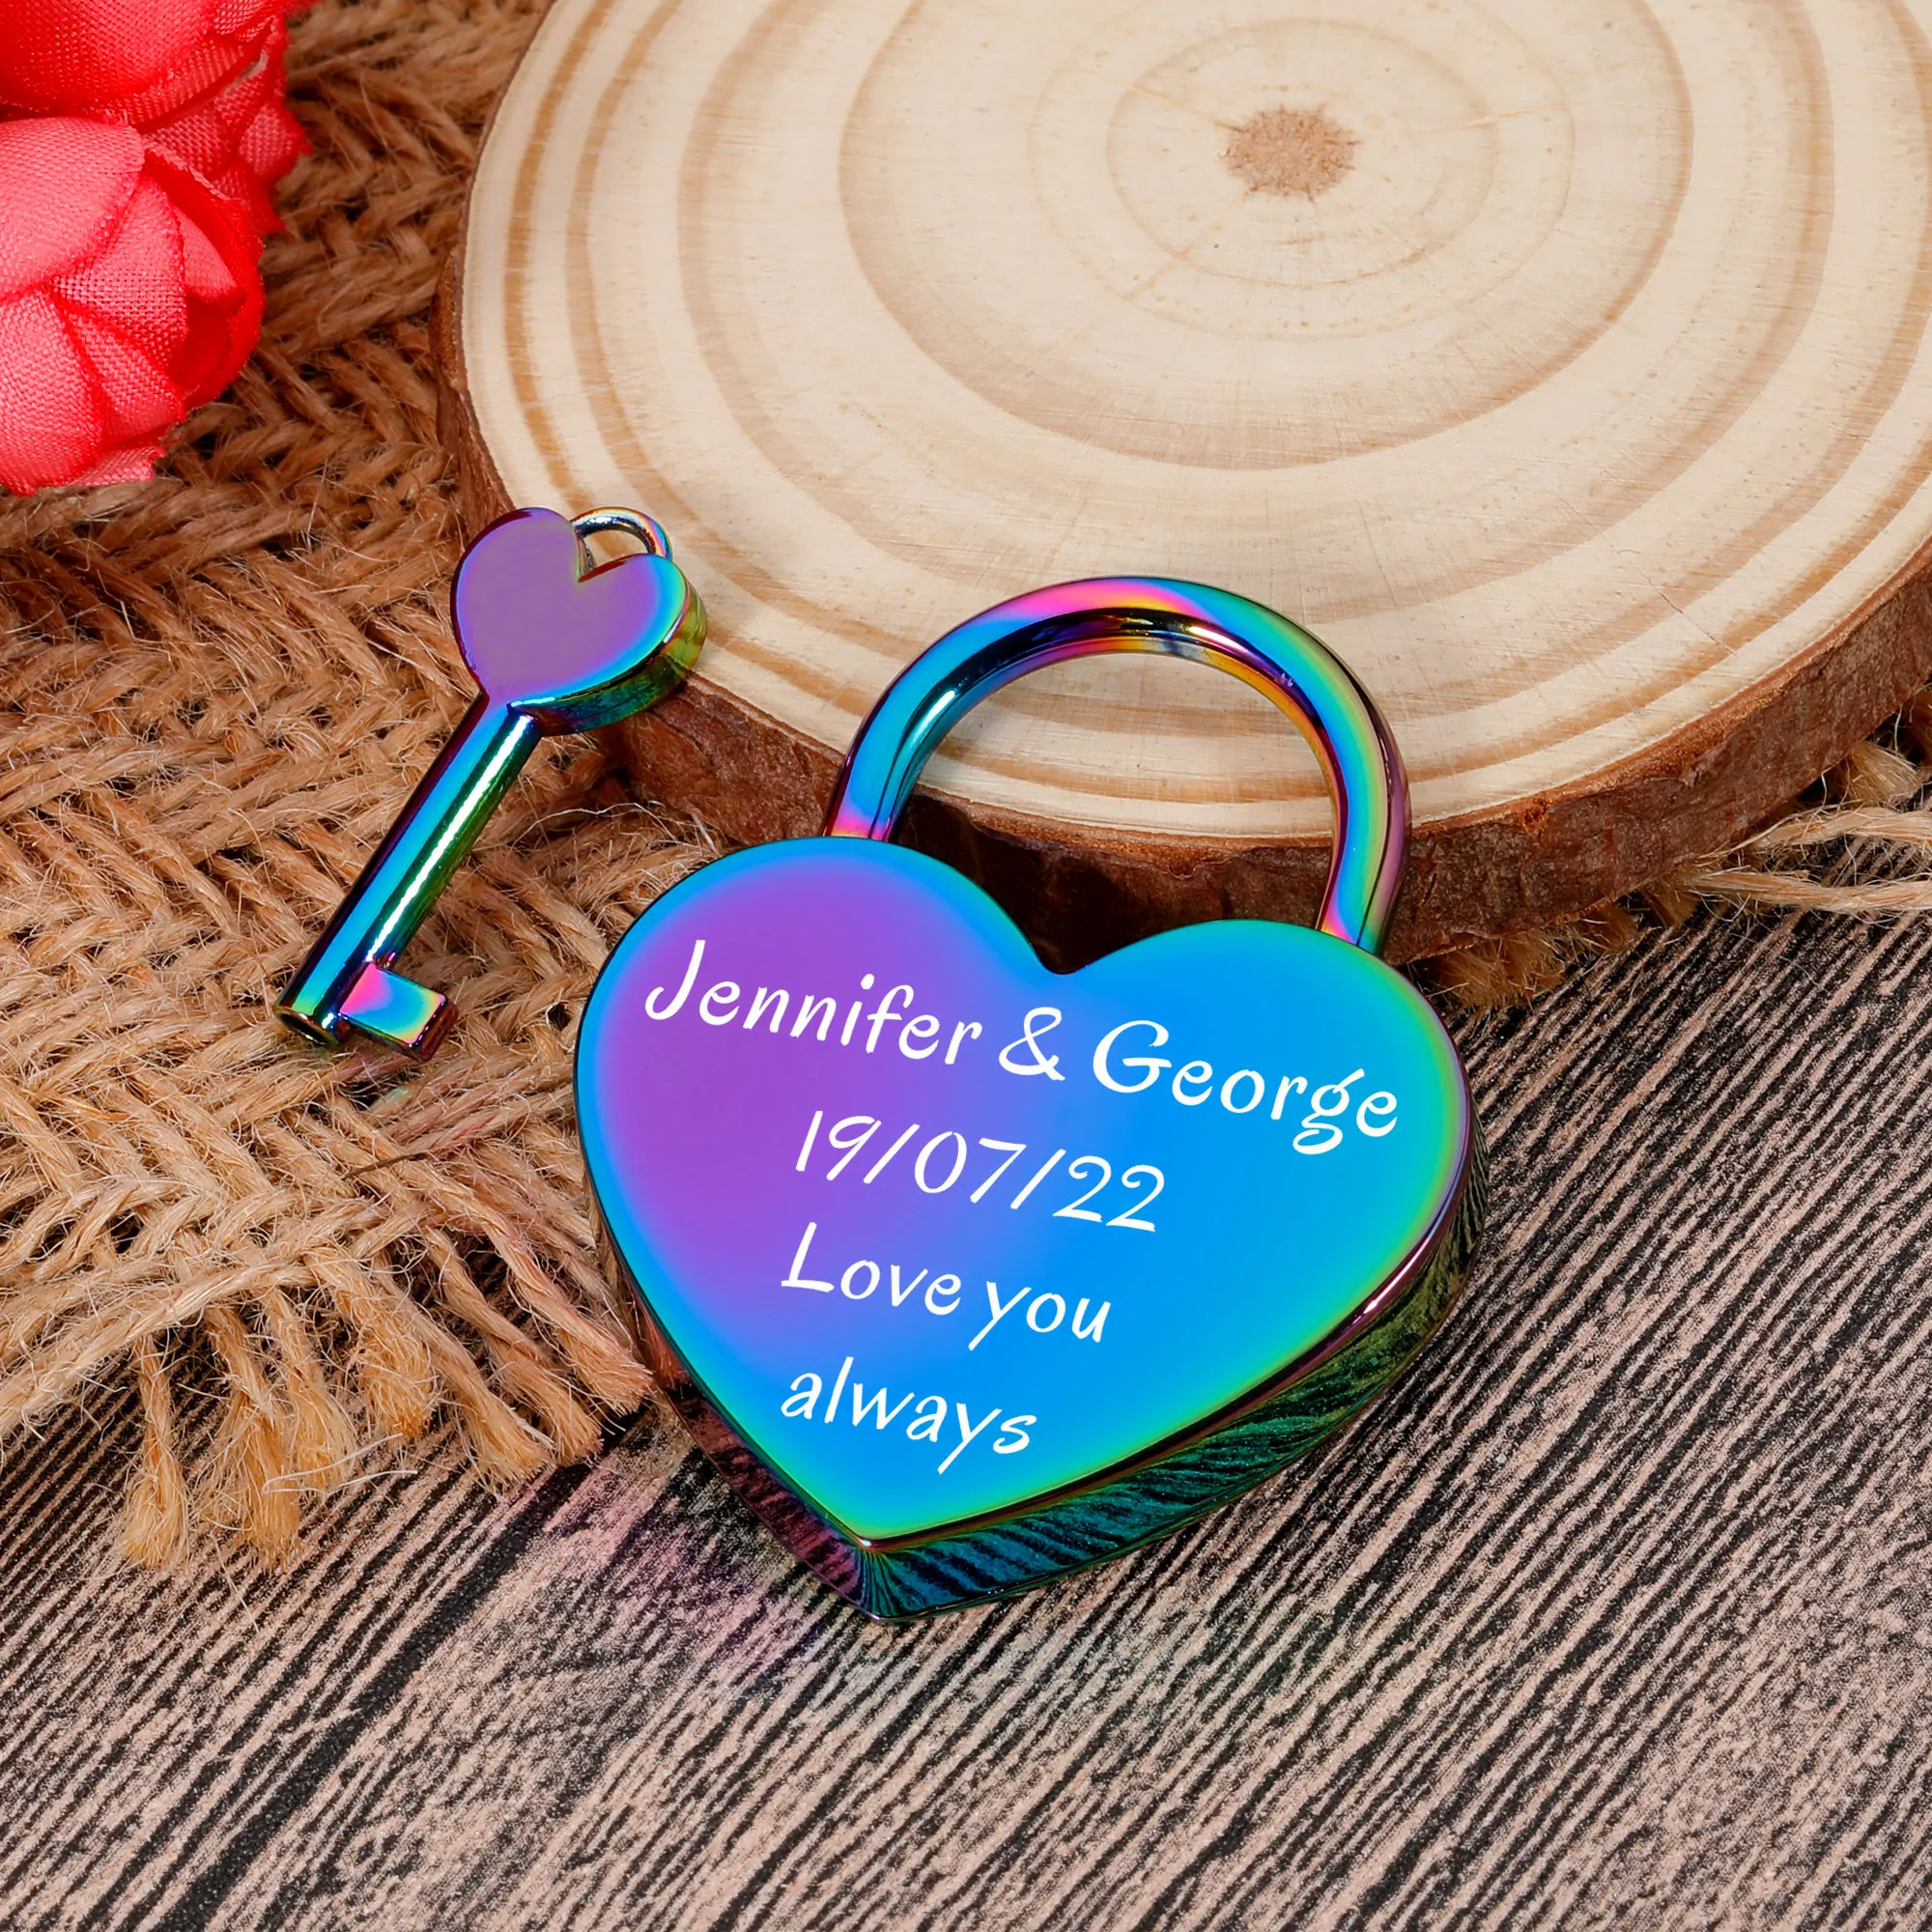 

Personalized Couples Rainbow Heart Padlock Engraved Name Date Love Lock with Key for Her Him Valentine's Day Anniversary Gifts